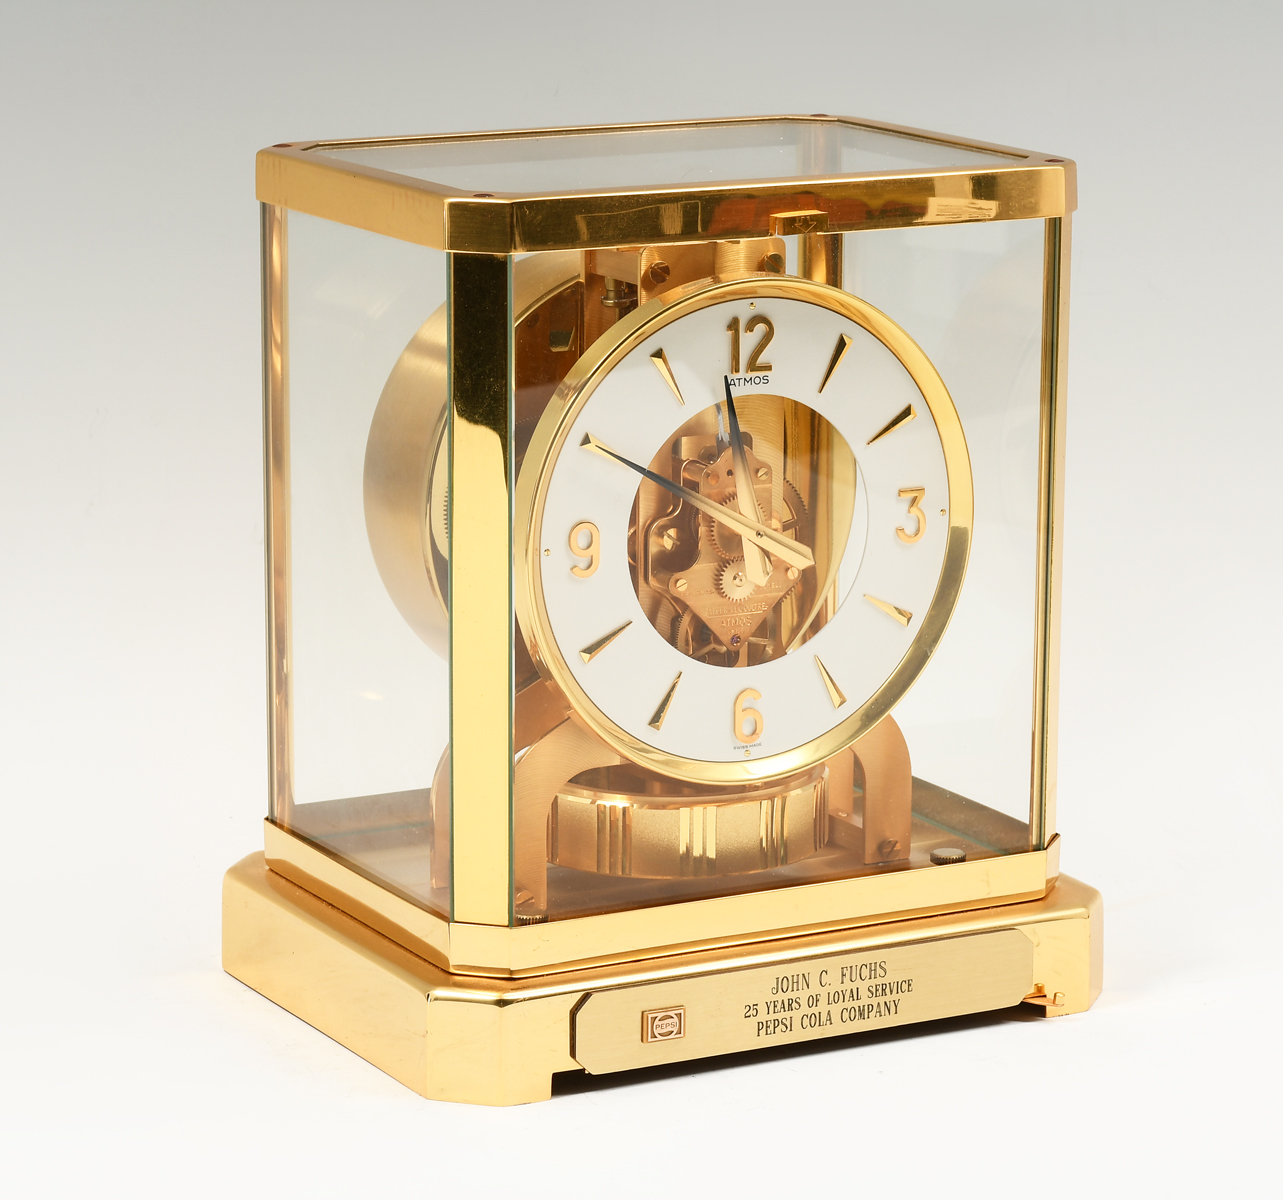 LE COULTRE 15 JEWEL ATMOS CLOCK: Serial